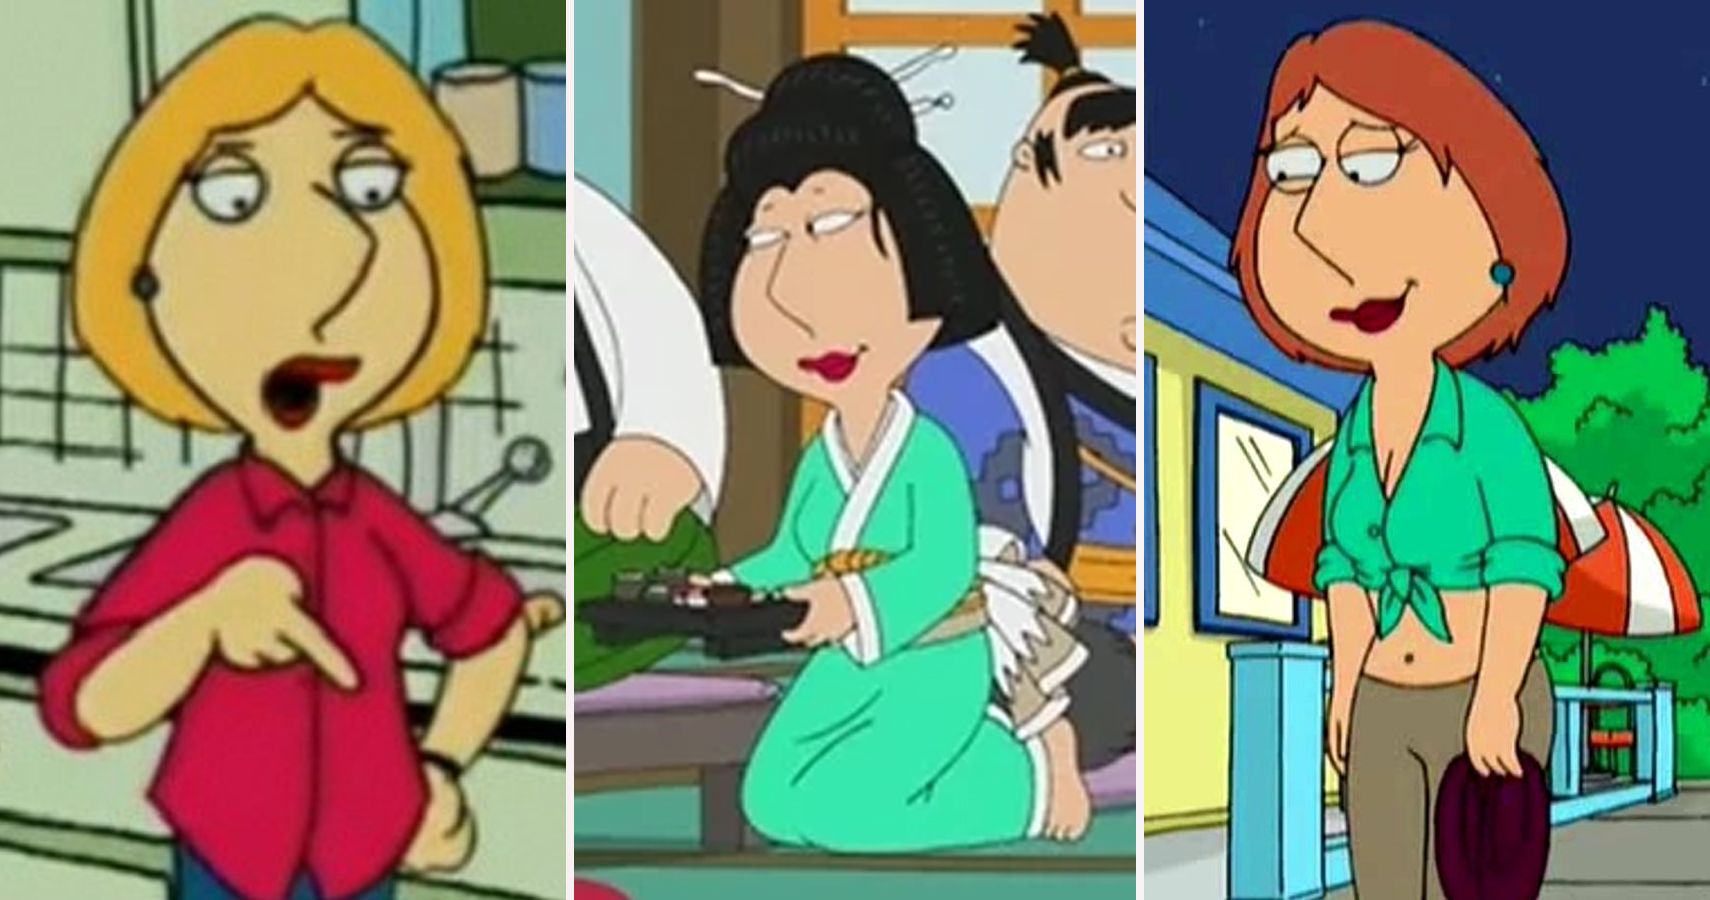 christiana b recommends lois griffin hot pics pic